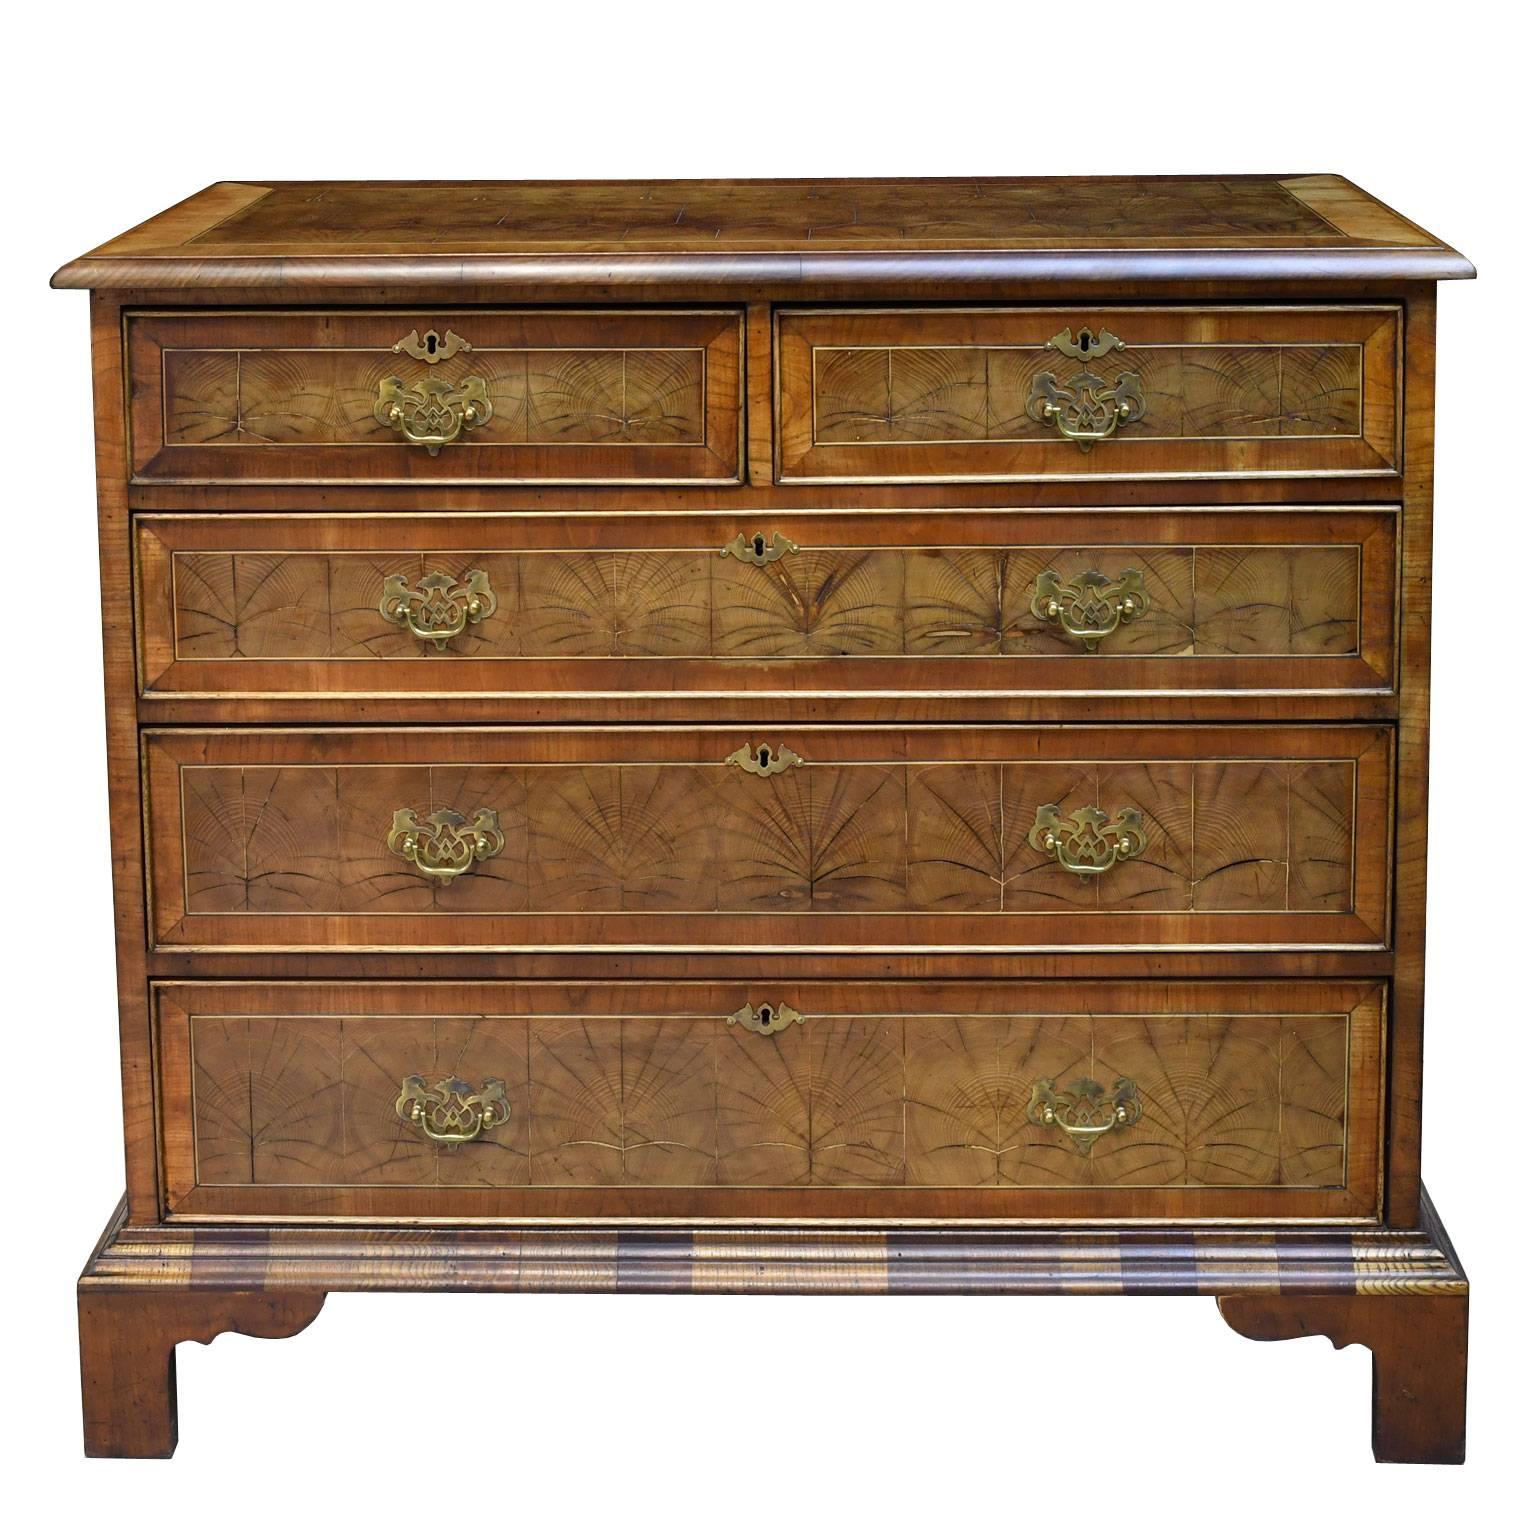 This lovely and functional chest is like the story of Eliza Doolittle in My Fair Lady since she has been made more sophisticated by several additions. Originally an antique pine chest of drawers, it has been clad with a beautiful, thick yew-wood